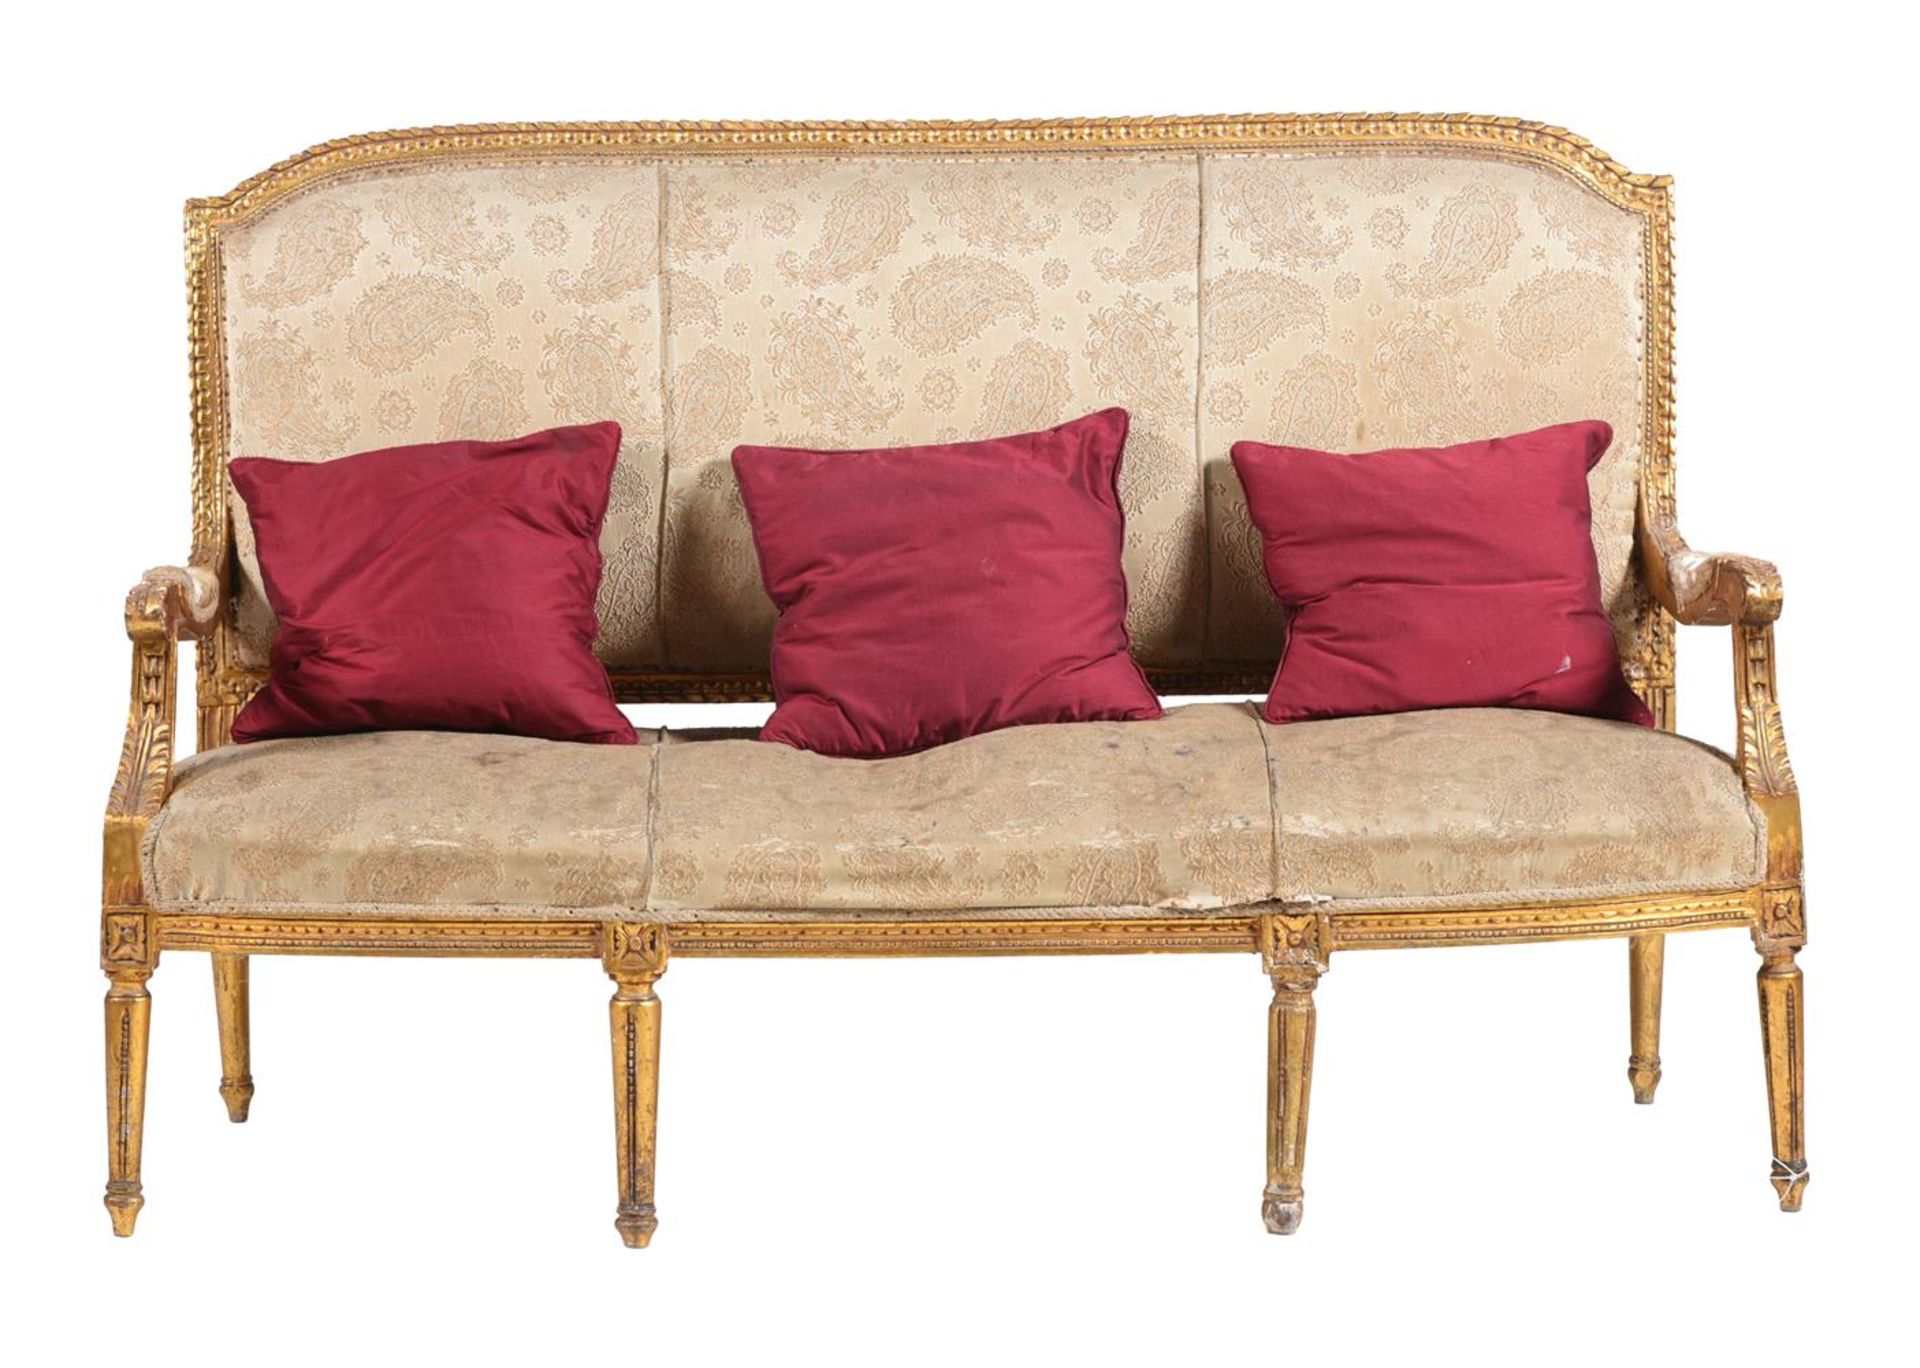 A GILTWOOD SOFA IN LOUIS XVI STYLE - Image 2 of 2